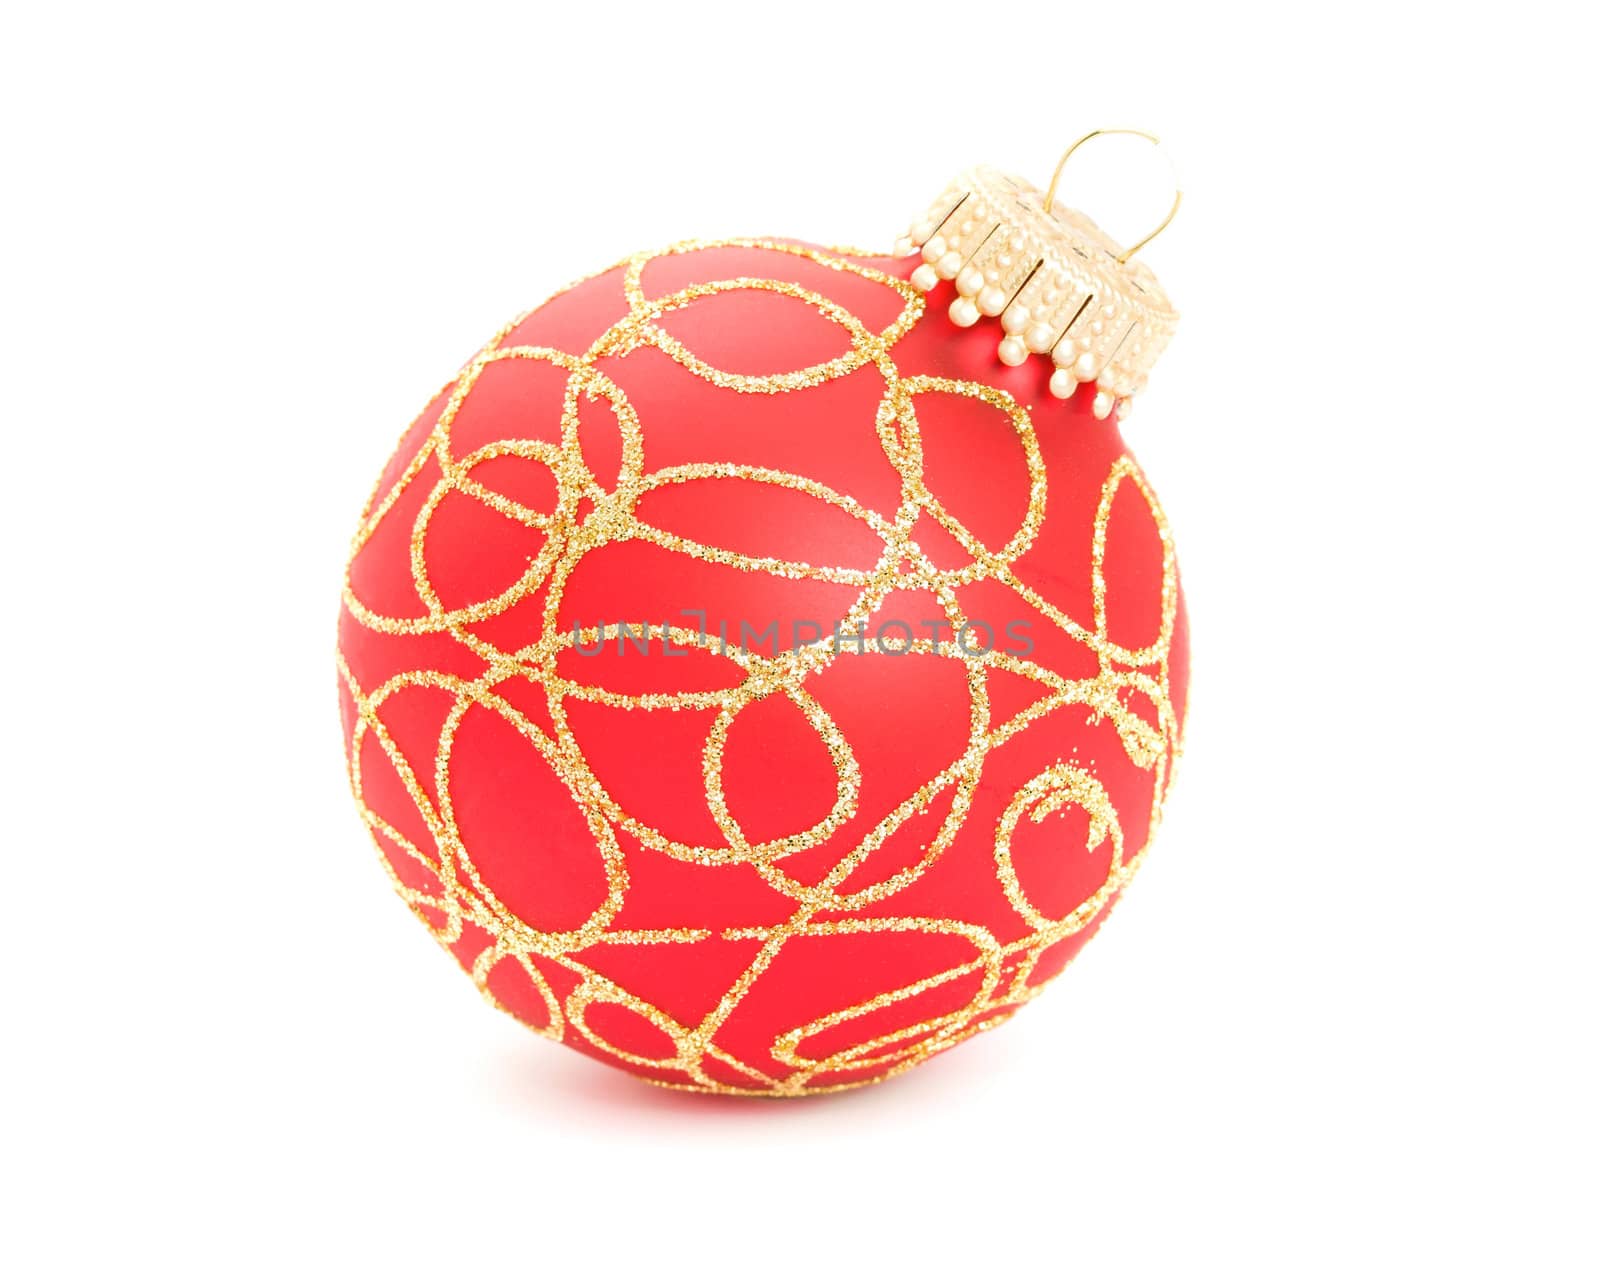 christmas ball isolated on the background by Bedolaga